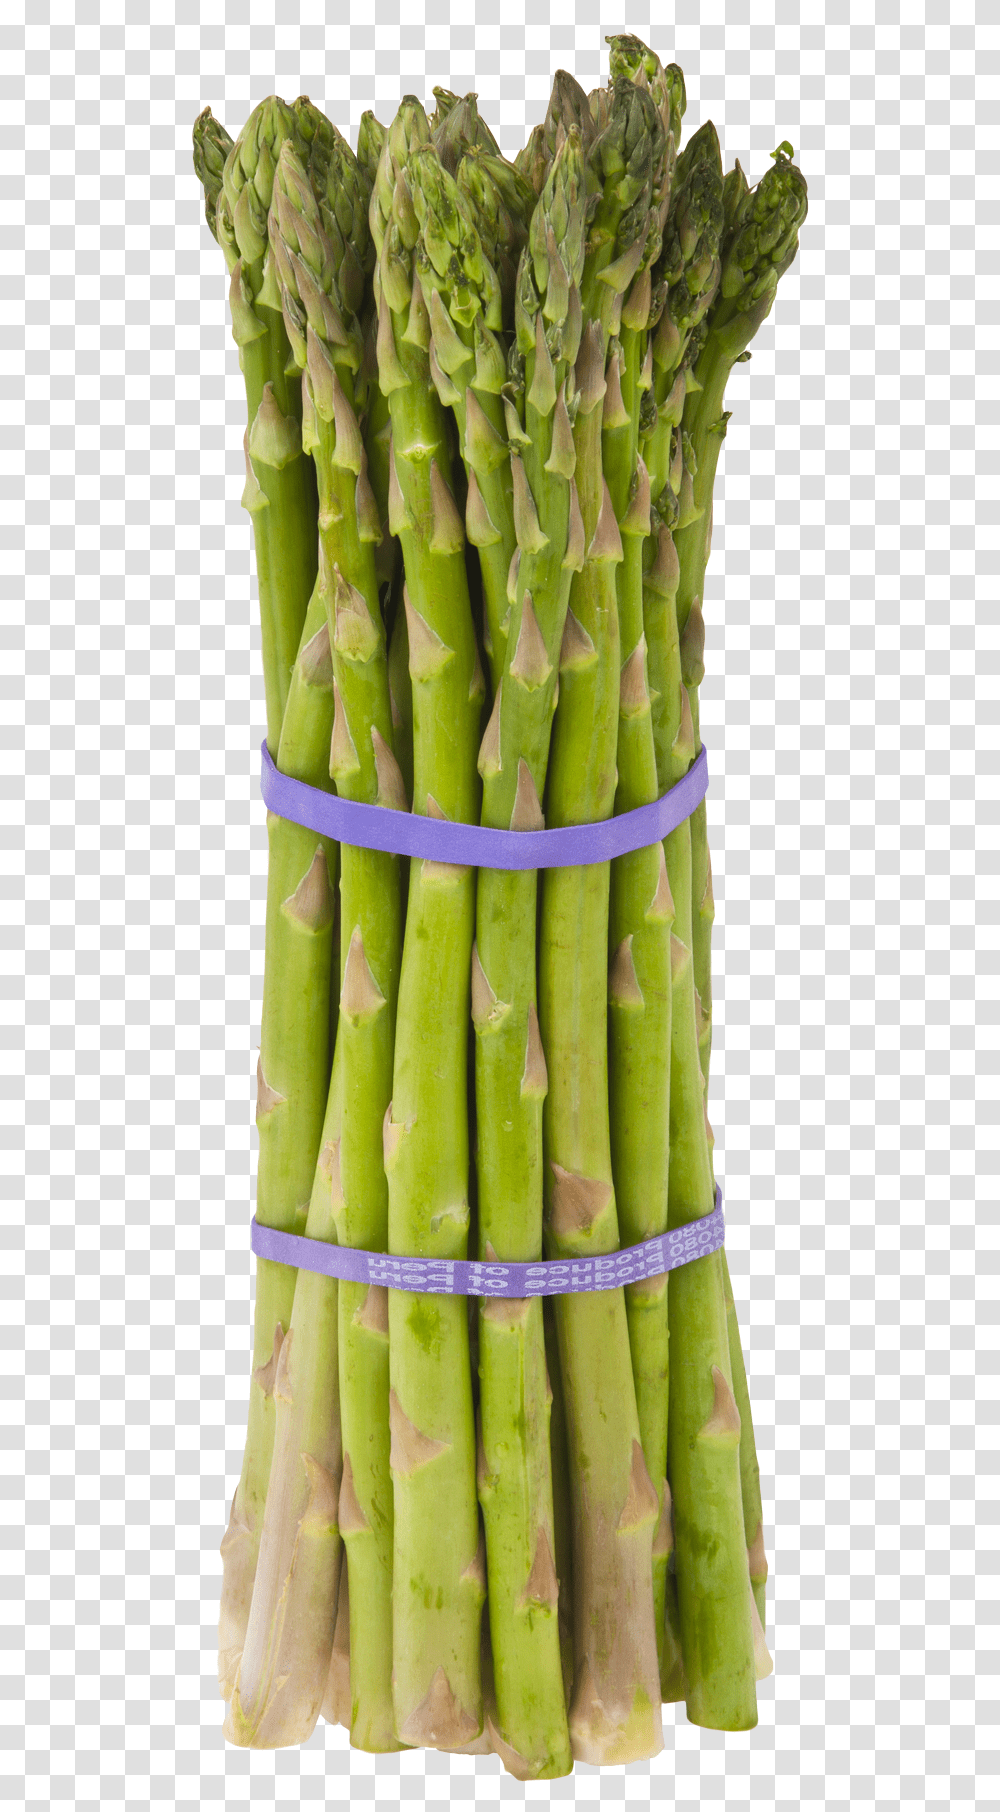 Download Asparagus Image For Free Asparagus Meaning In Bengali, Plant, Vegetable, Food, Pineapple Transparent Png